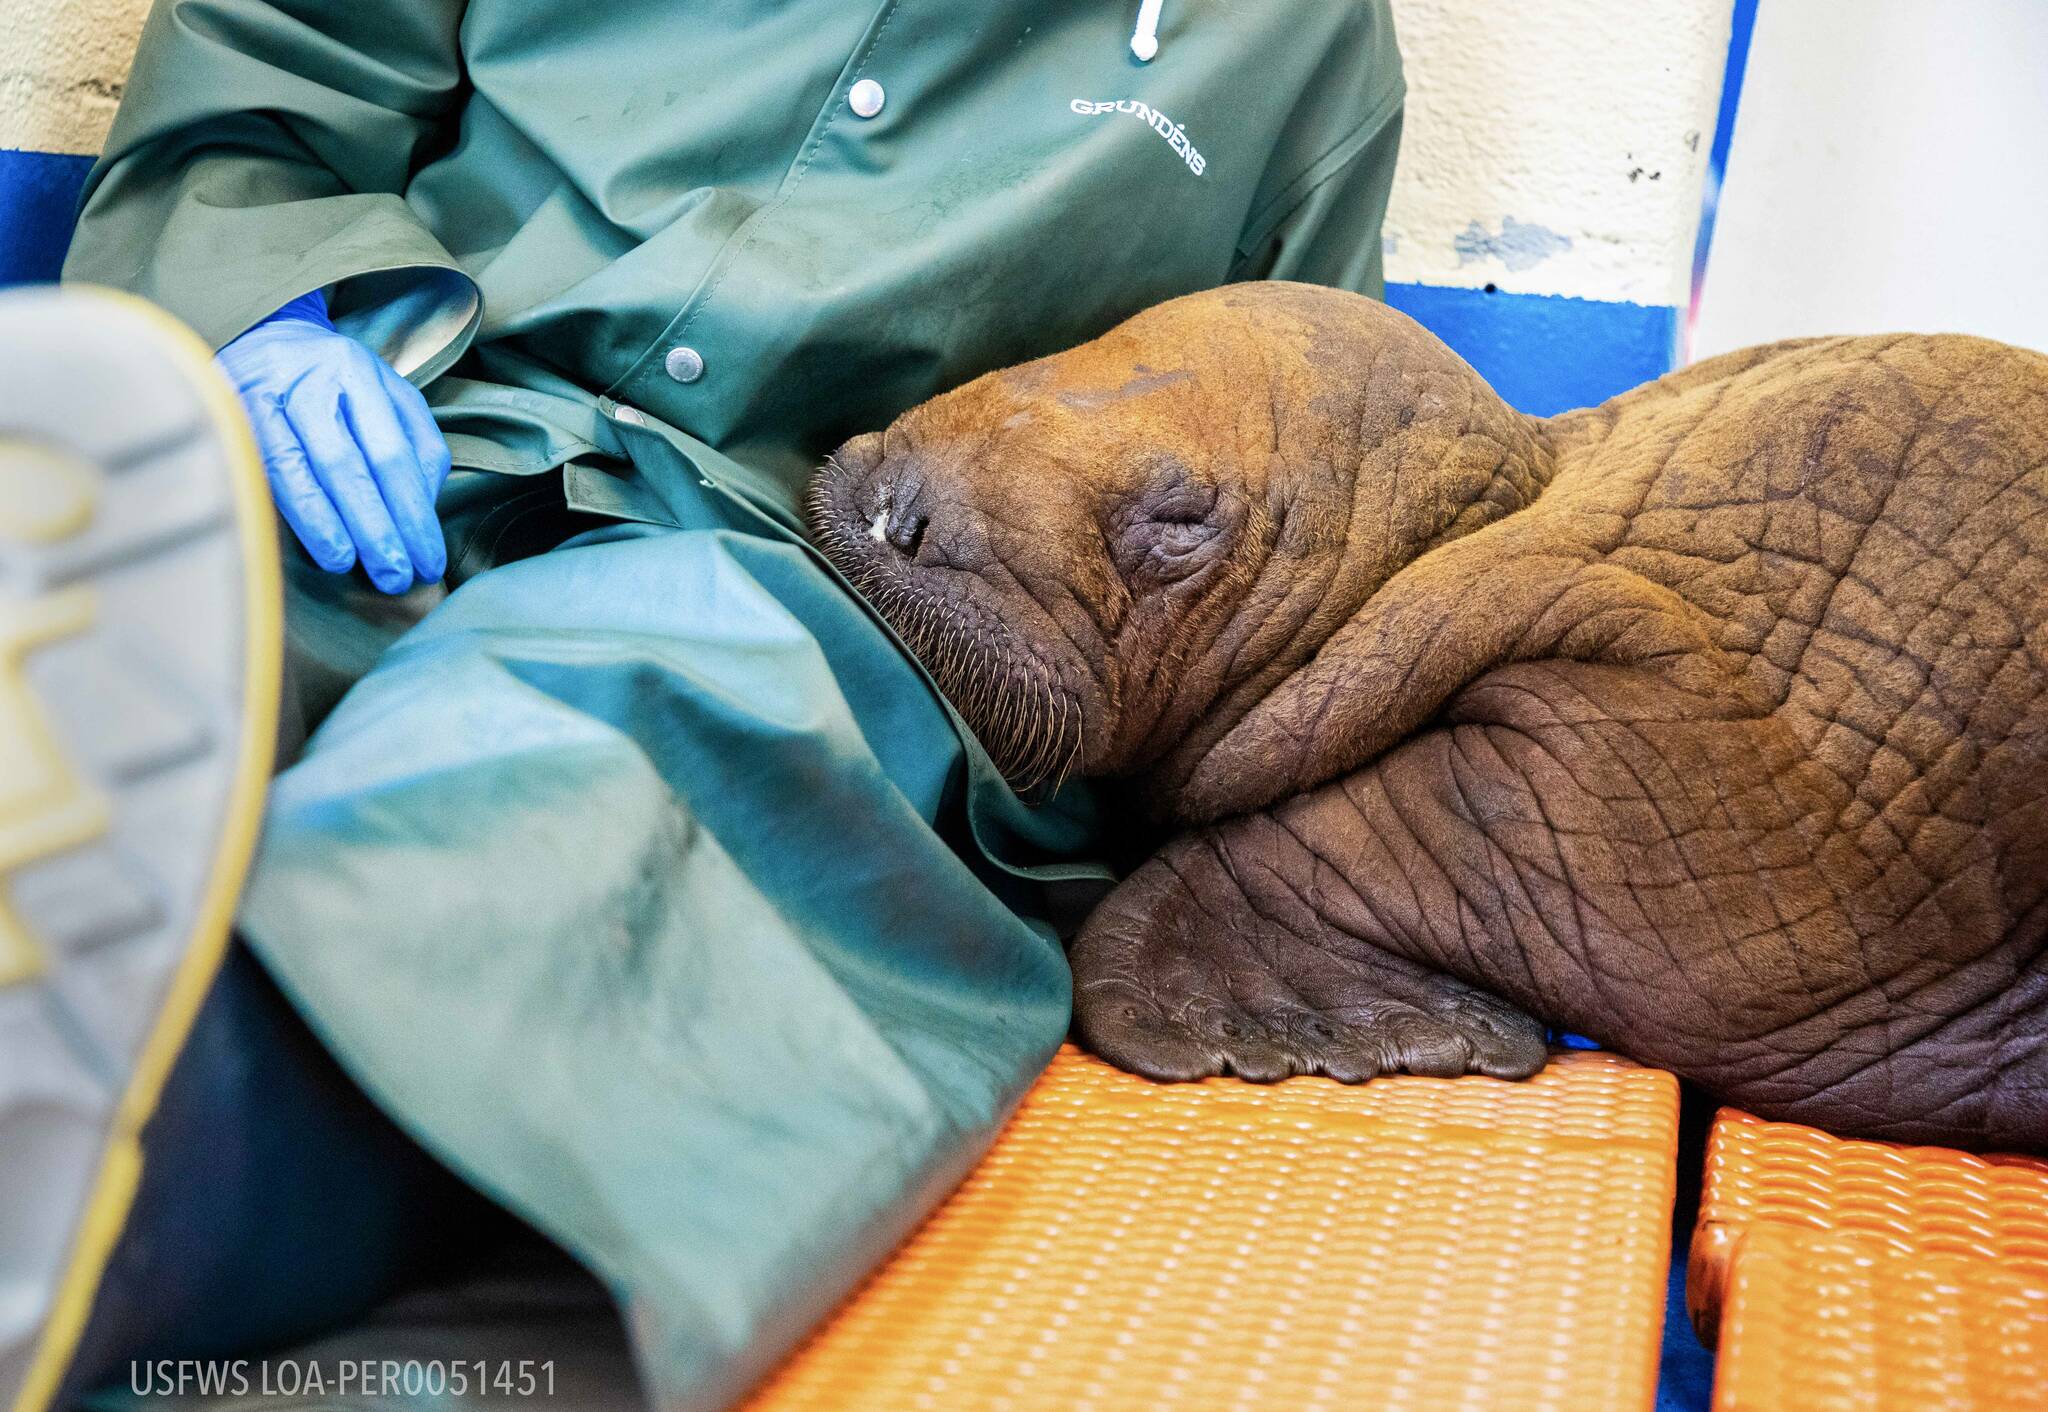 A Pacific walrus pup rests his head on the lap of an ASLC staff member after being admitted to
the Alaska SeaLife Center Wildlife Response Program on Aug. 1, 2023. Walruses are highly
tactile and social animals, receiving near-constant care from their mothers during the first two
years of life. To emulate this maternal closeness, round-the-clock “cuddling” is being provided to
ensure the calf remains calm and develops in a healthy manner. (Photo courtesy Kaiti Grant/Alaska SeaLife Center)